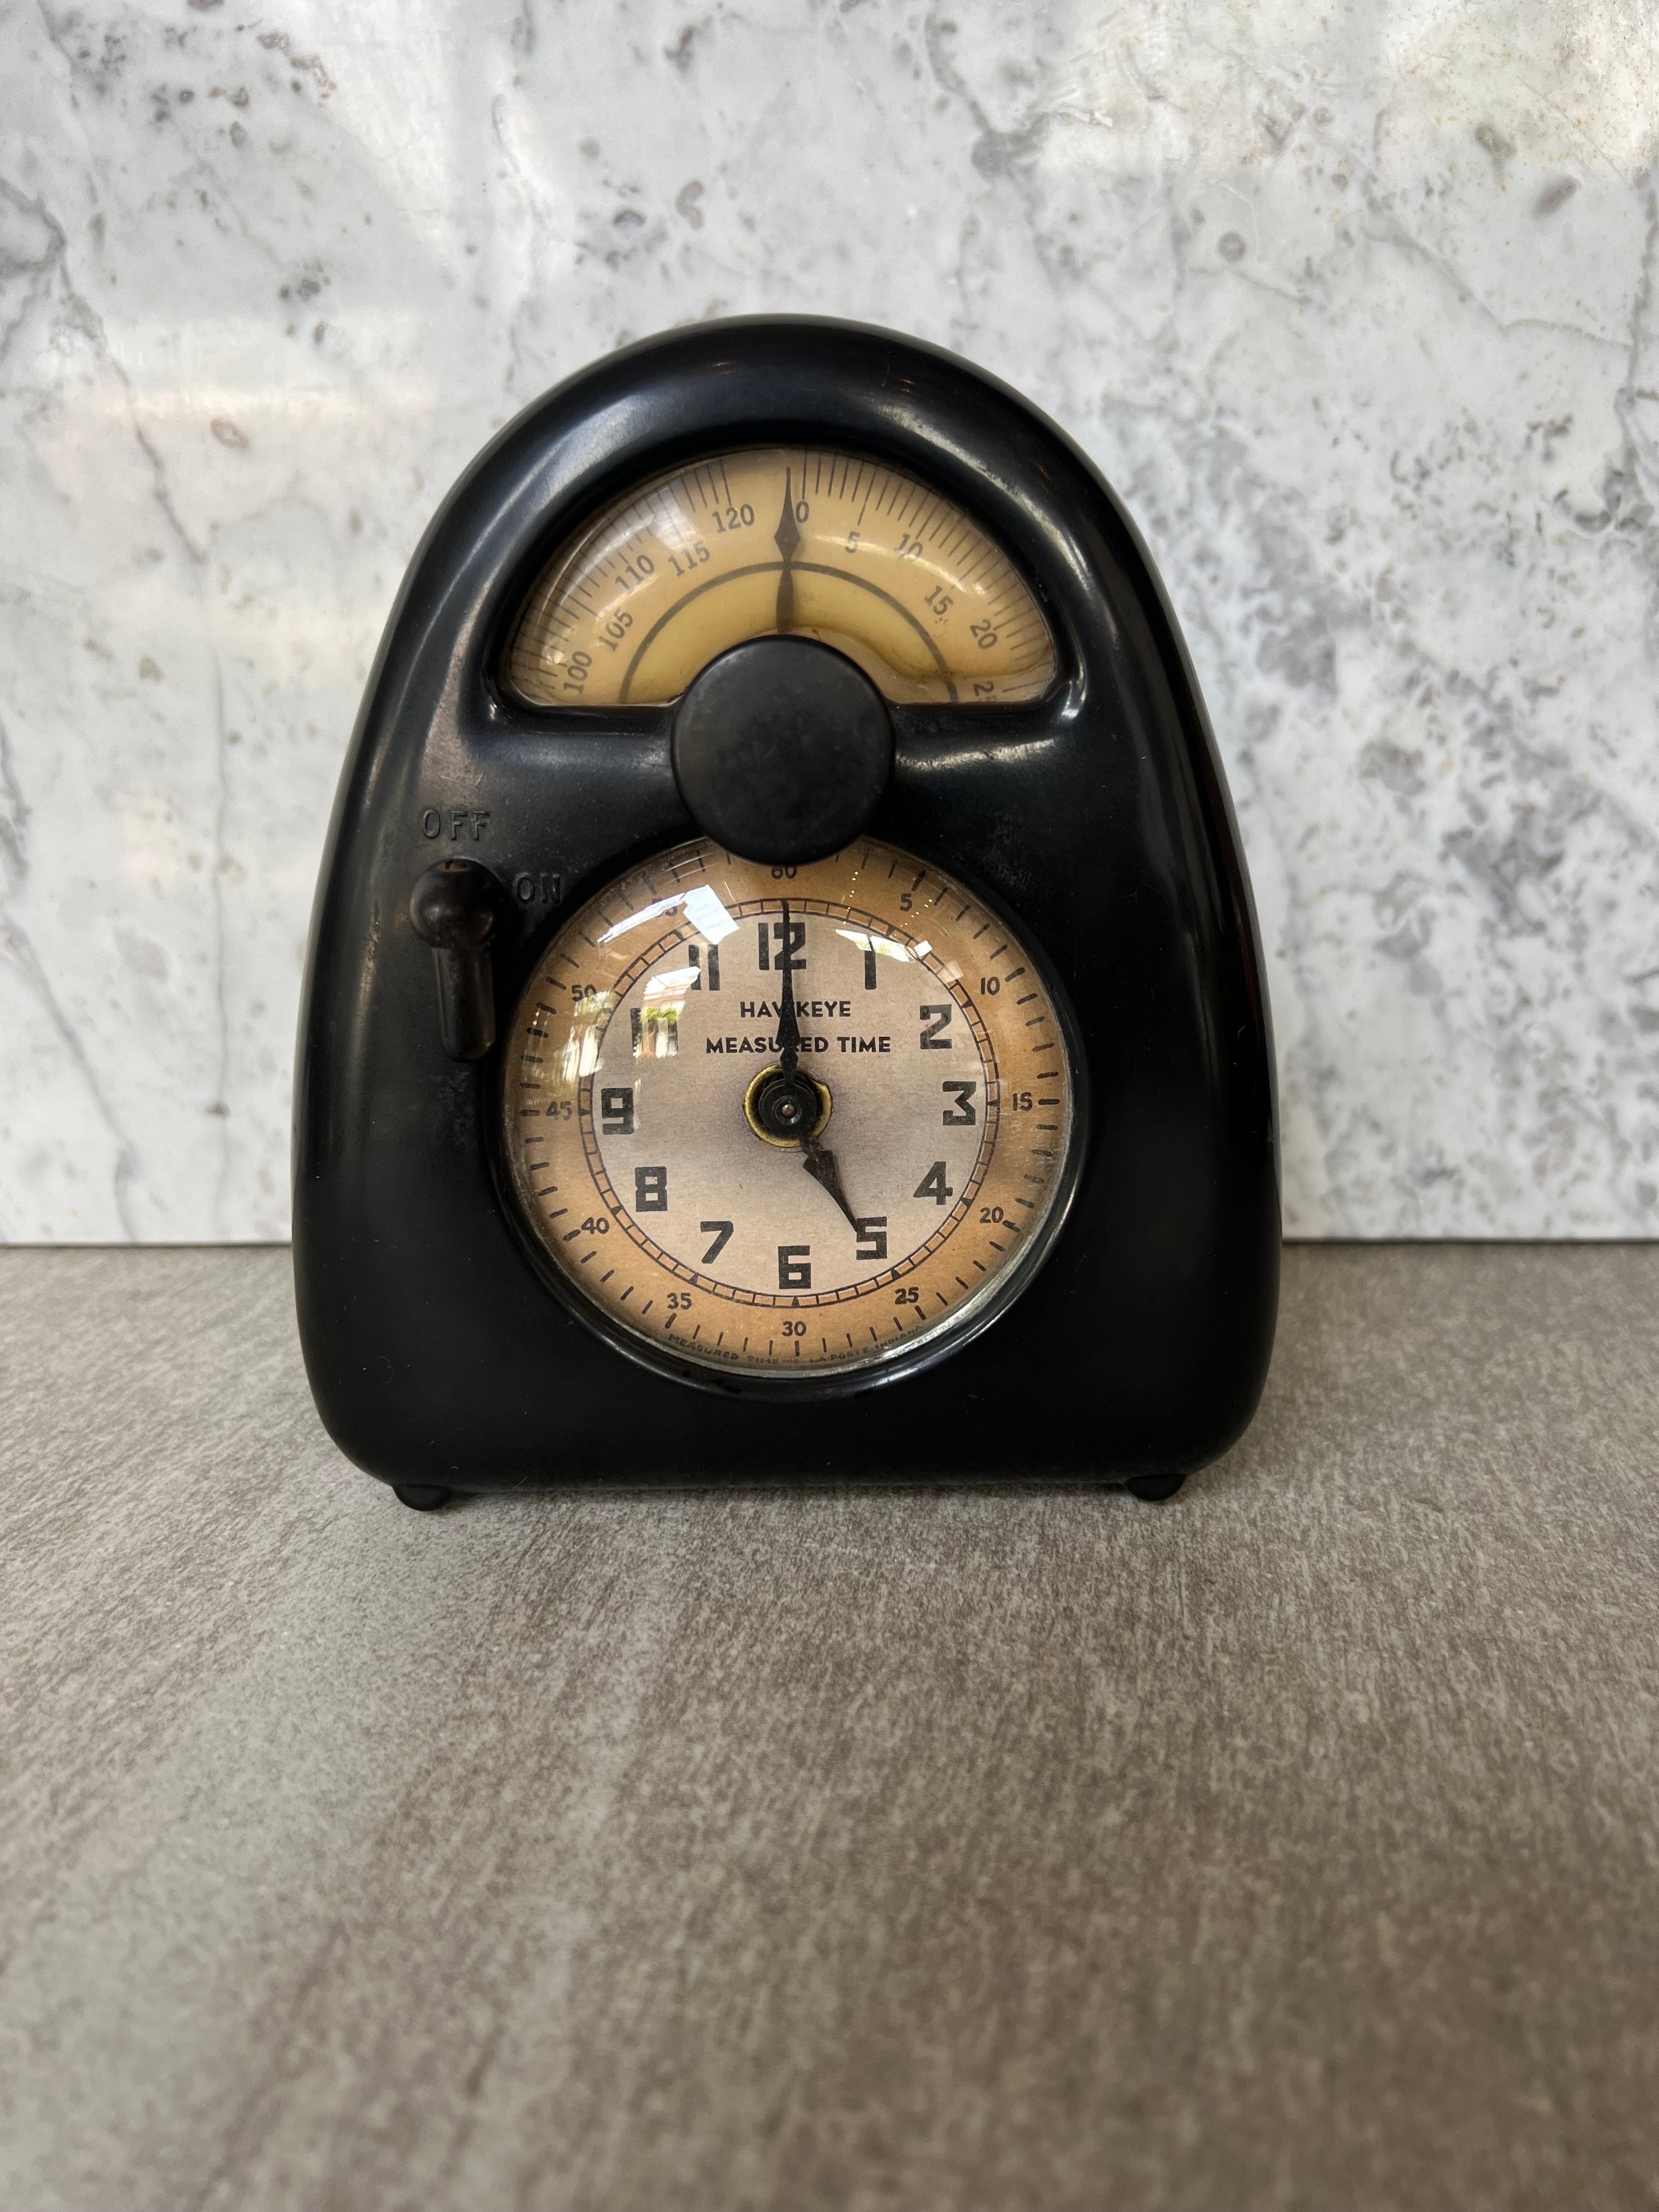 The “Measured Time” clocks have appeared previously on the market without attribution, identified only by the clockface “Hawkeye” label or the Stevenson Manufacturing Company label on the reverse. In his autobiography, Isamu Noguchi mentions that